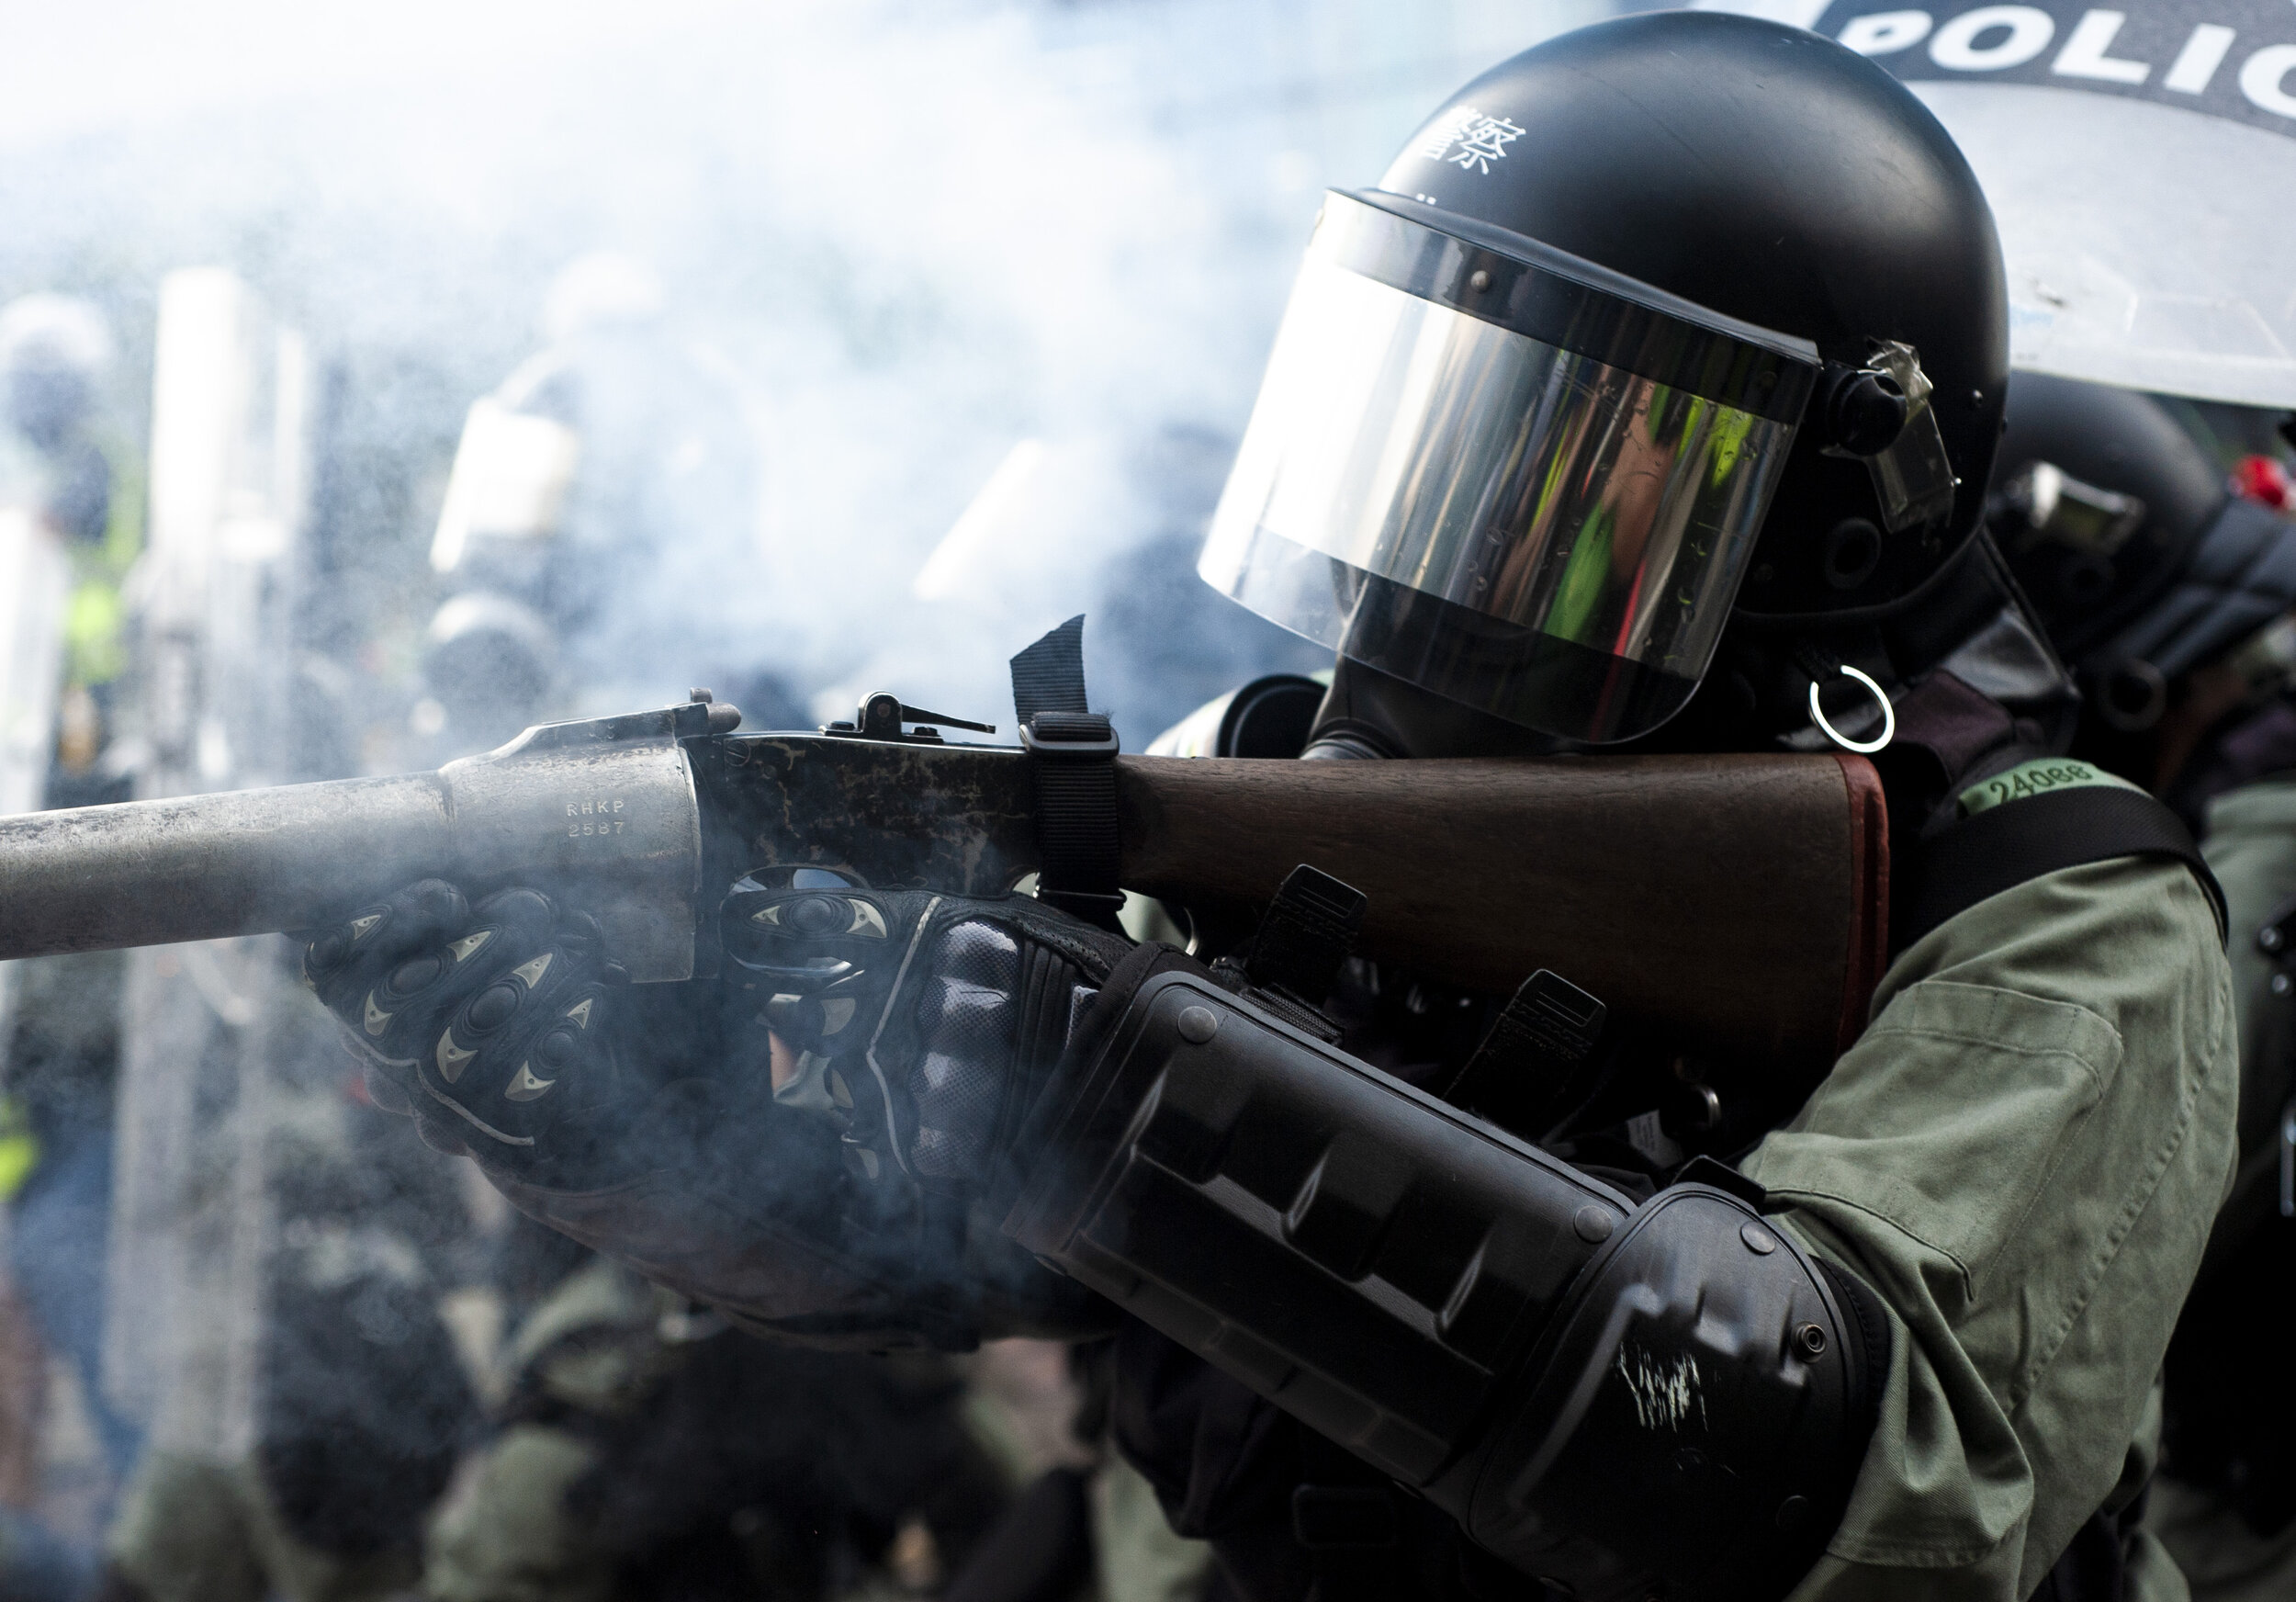  A police officer fires a tear gas canister at pro-democracy protesters during heavy clashes in Kwun Tong on August 24, 2019.  